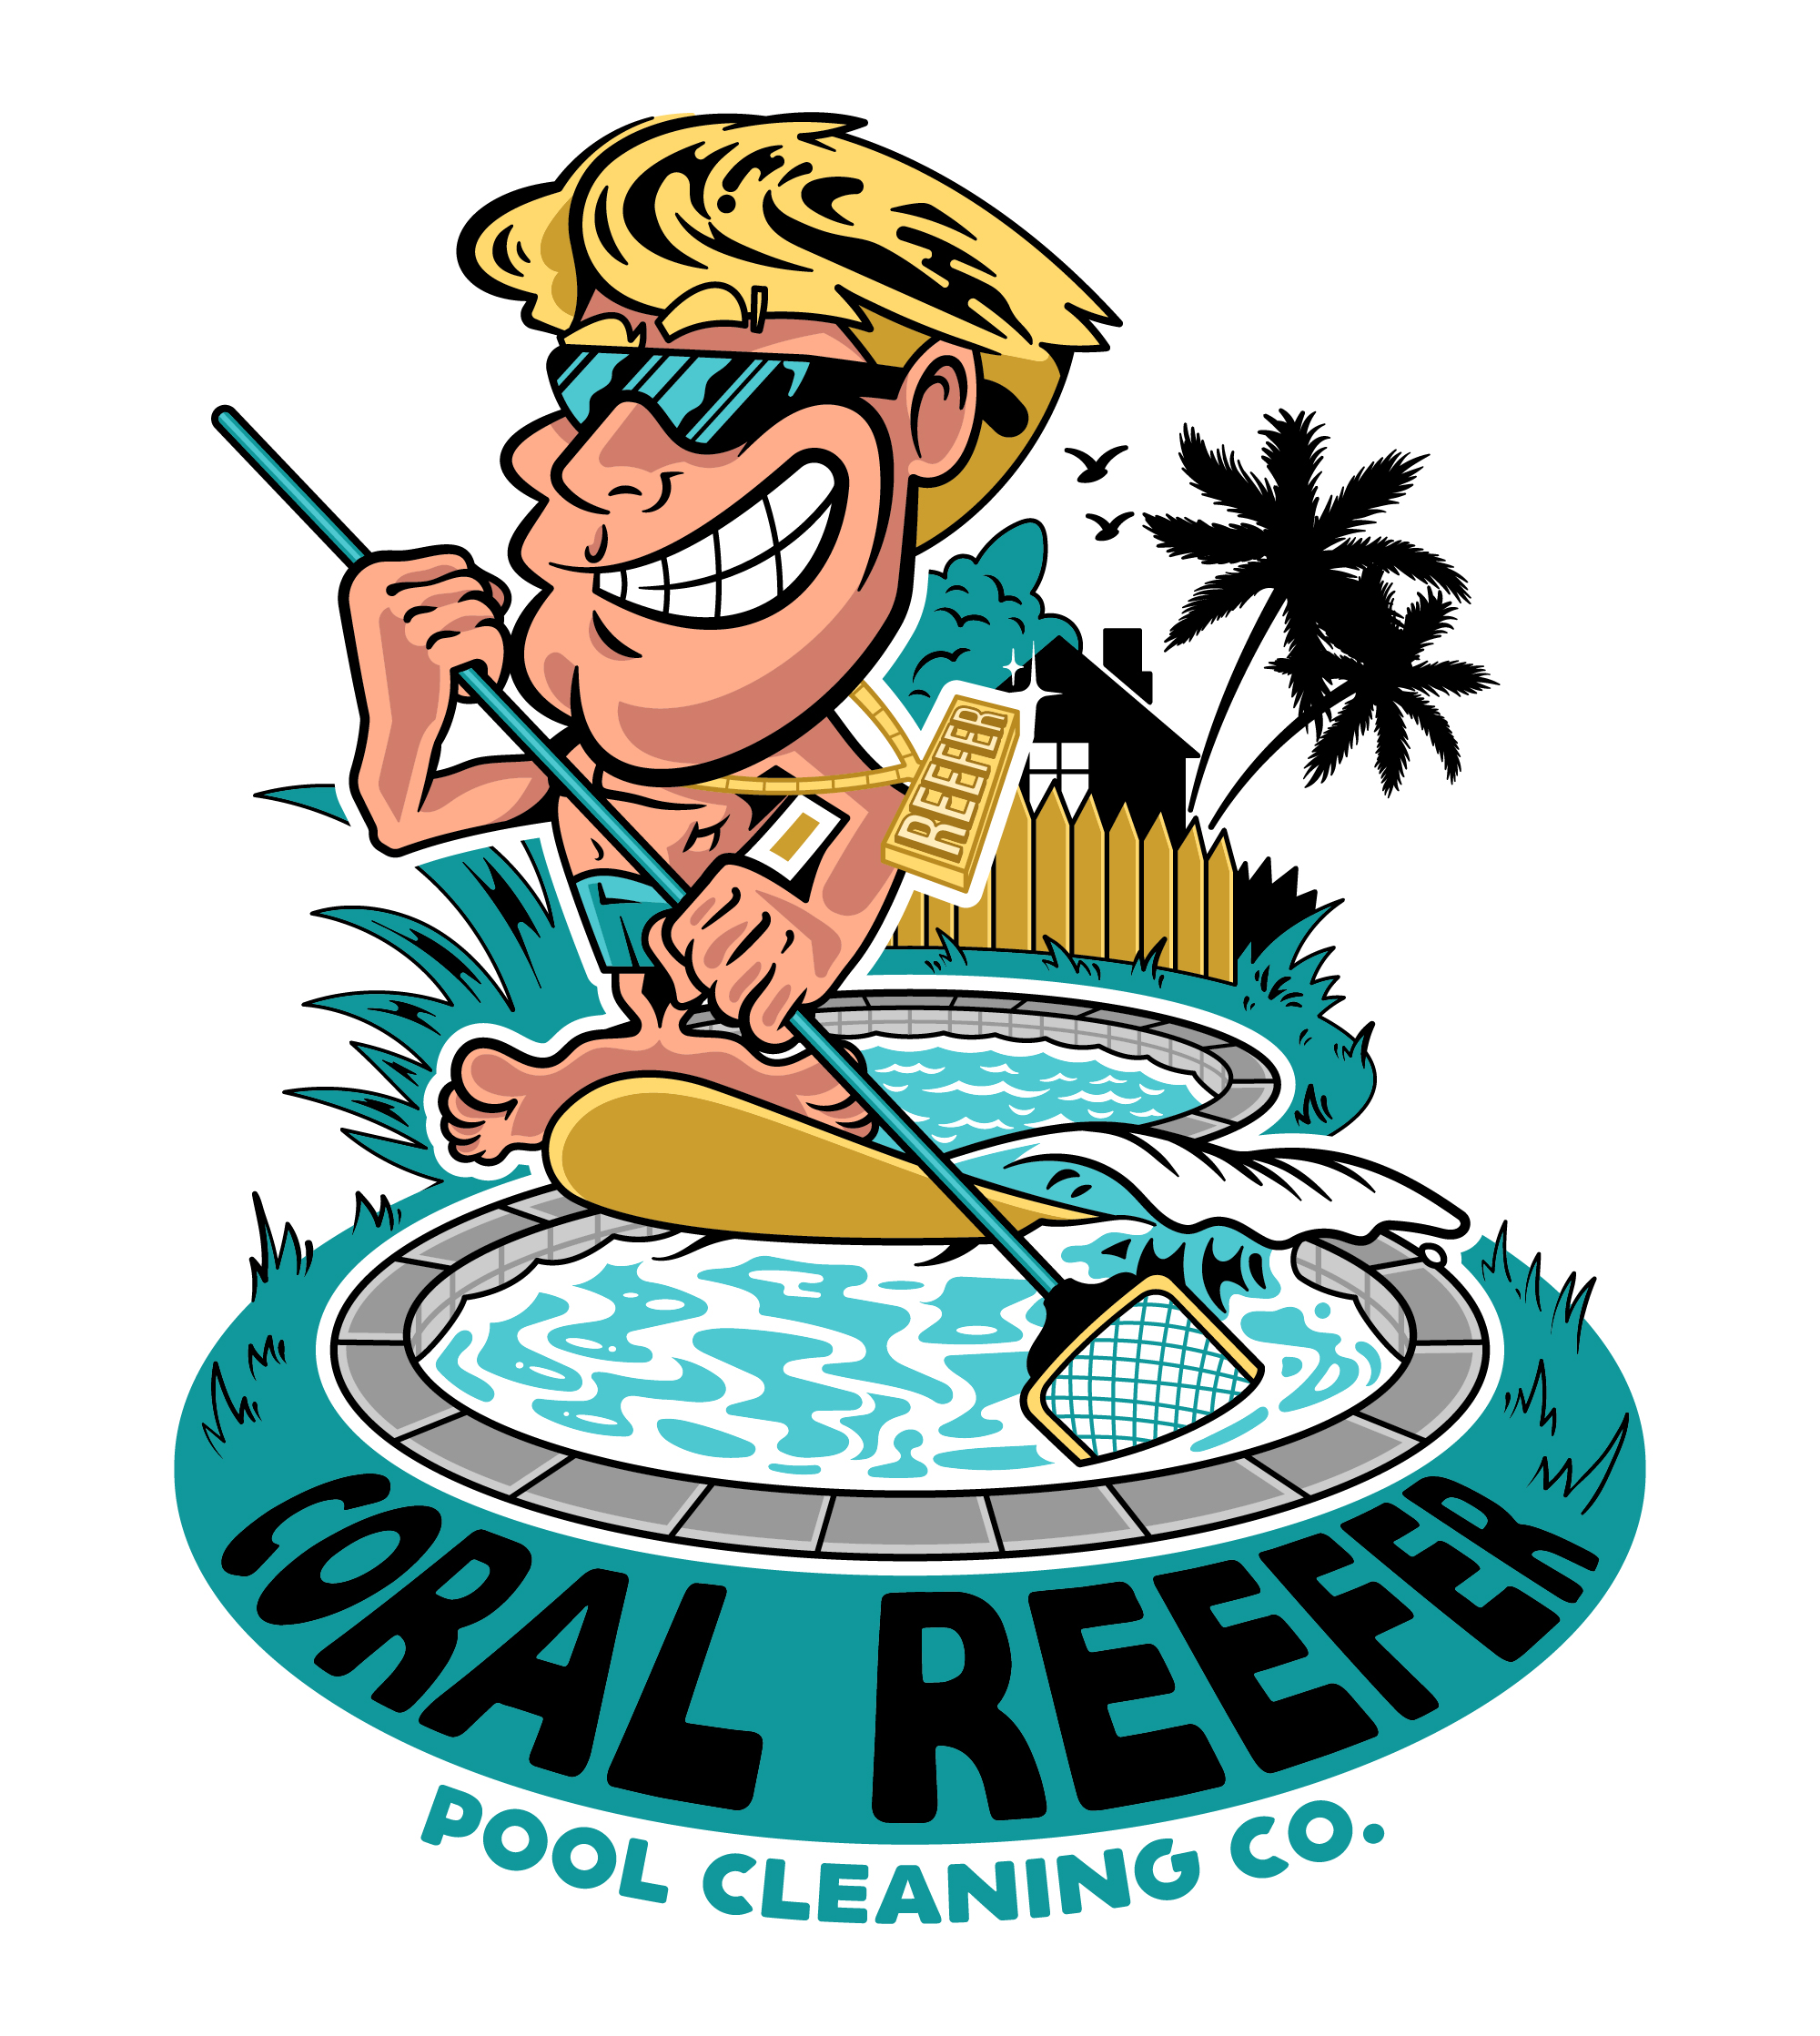 Coral Reefer Pool Cleaning Co. Logo